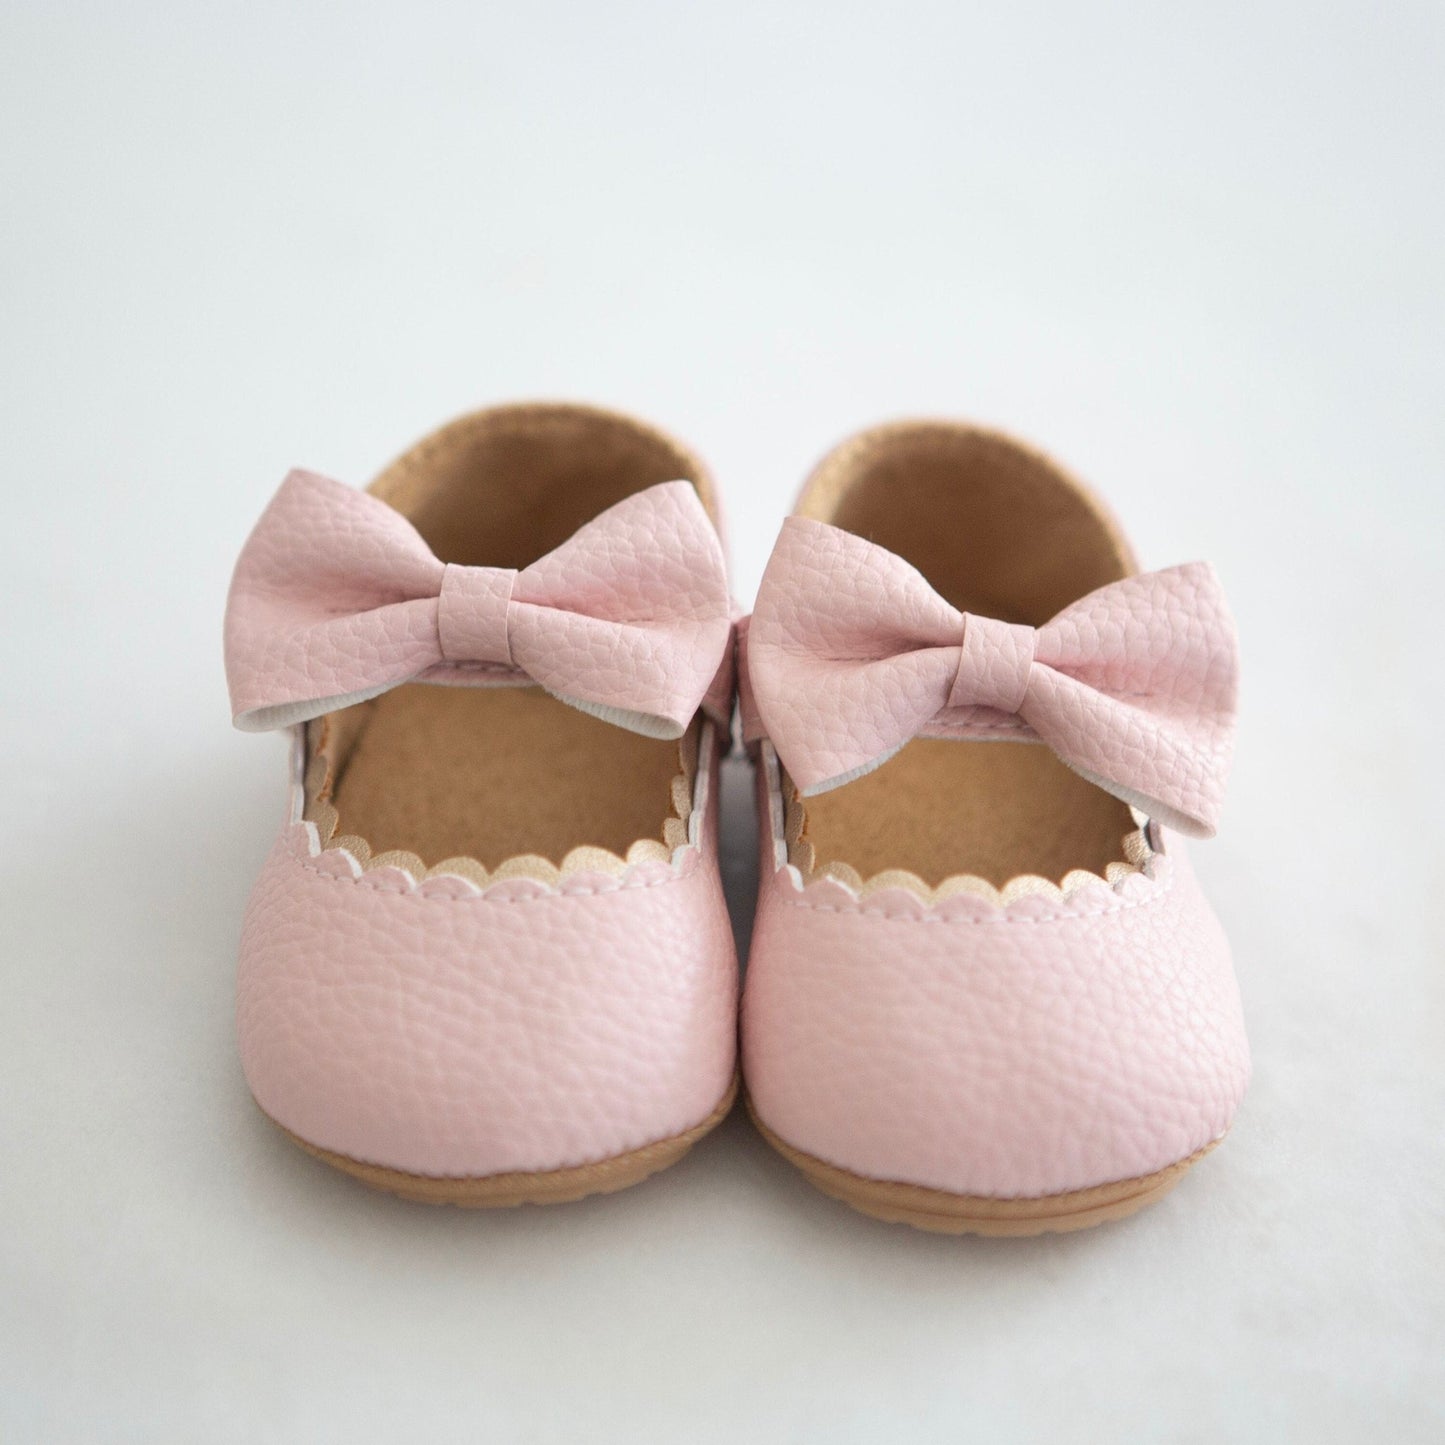 Mary Janes Baby Shoes - Cheerful Lane